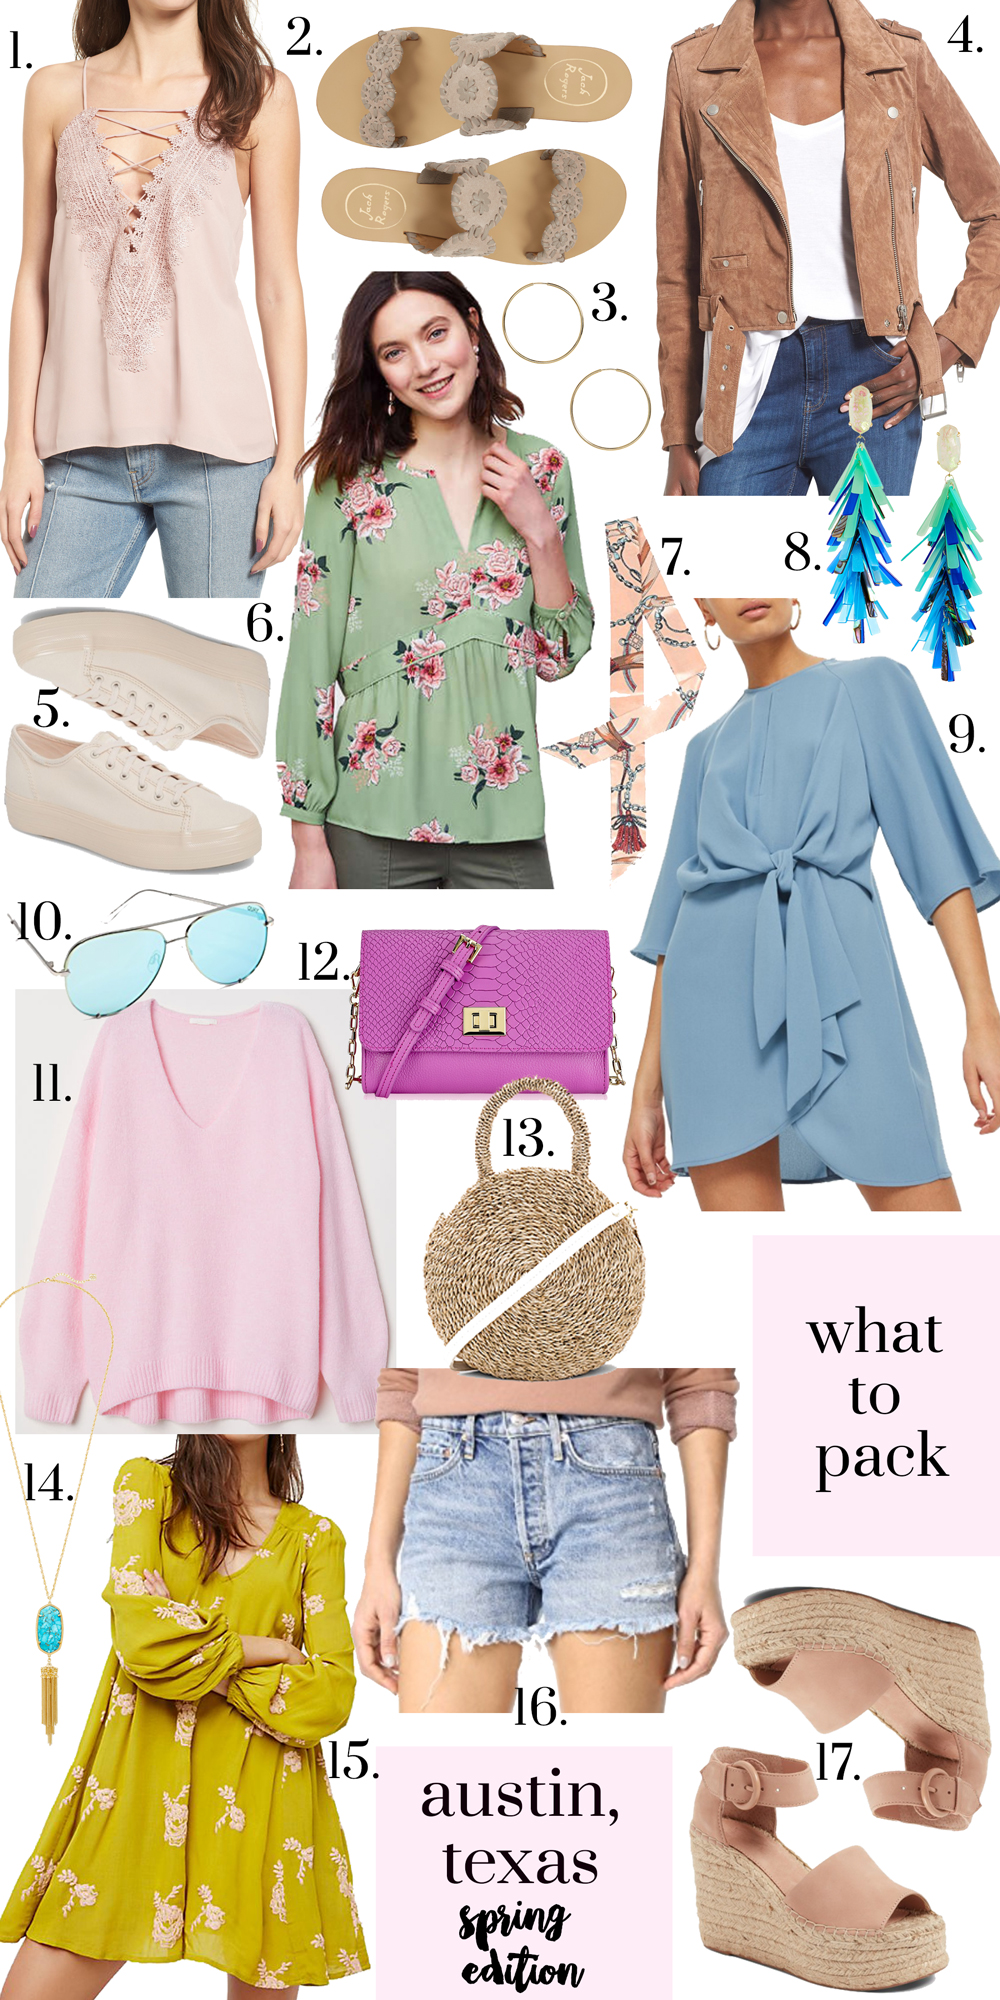 Austin Packing List / What to pack for Austin, TX